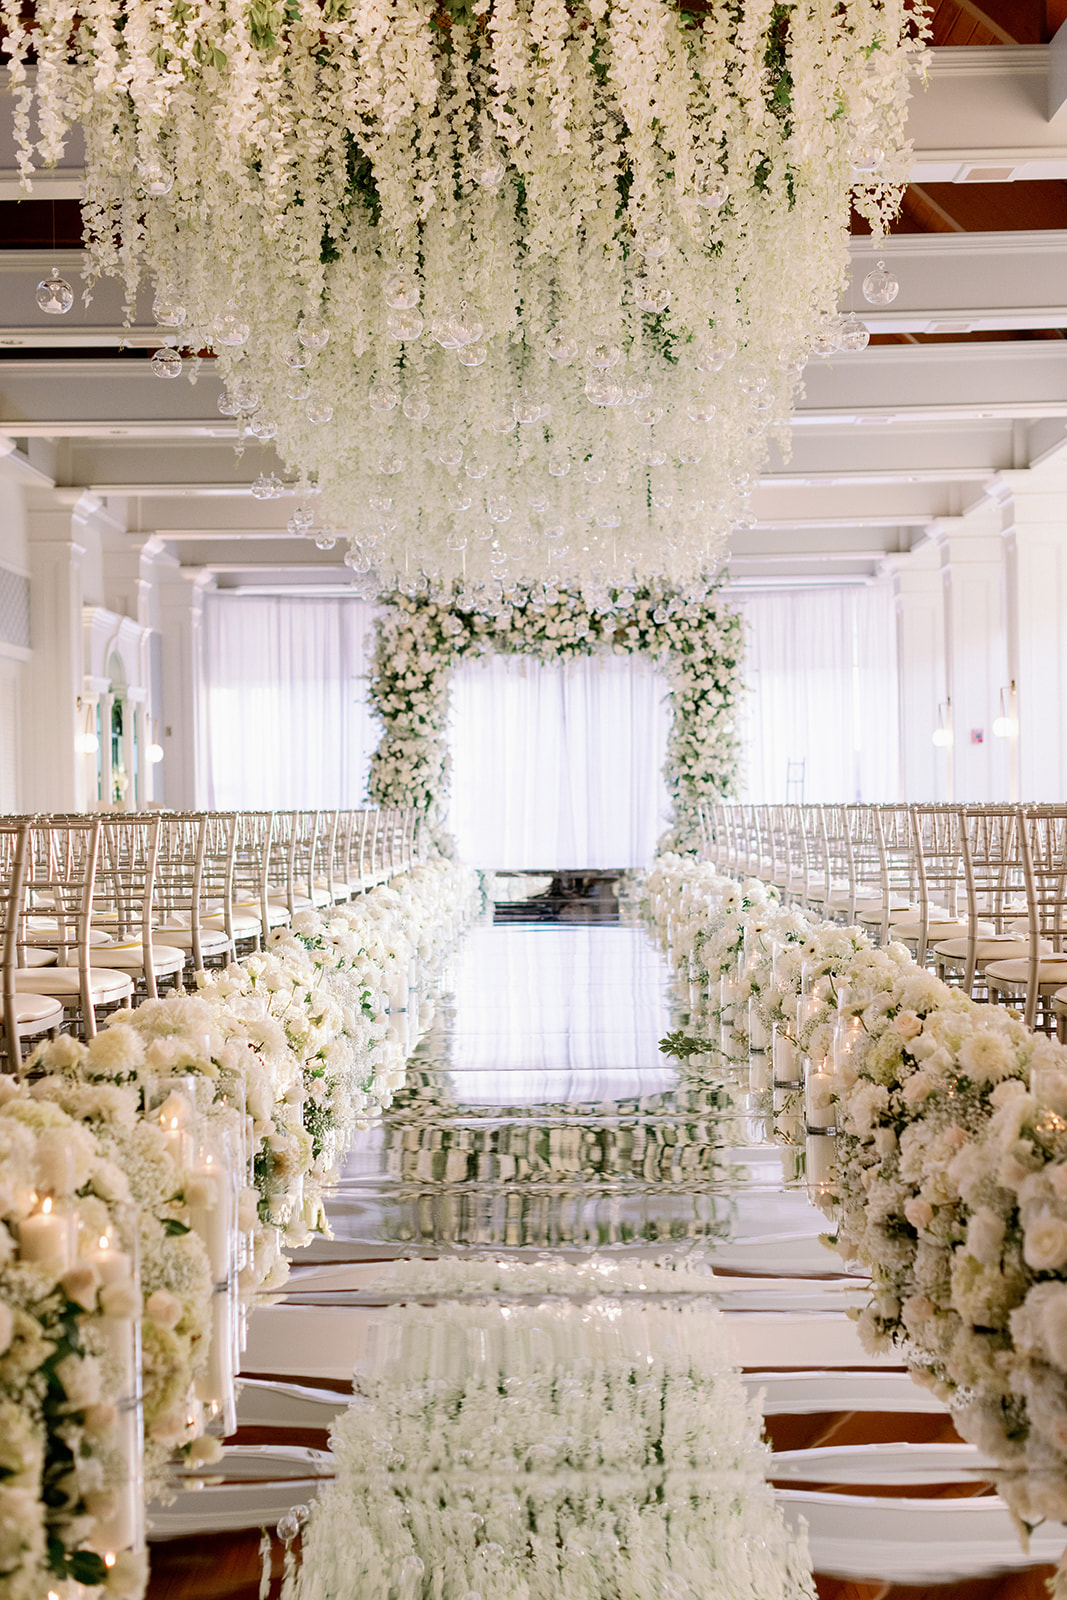 Lavish floral wedding ceremony with a reflective floor at Pine Hollow Country Club.